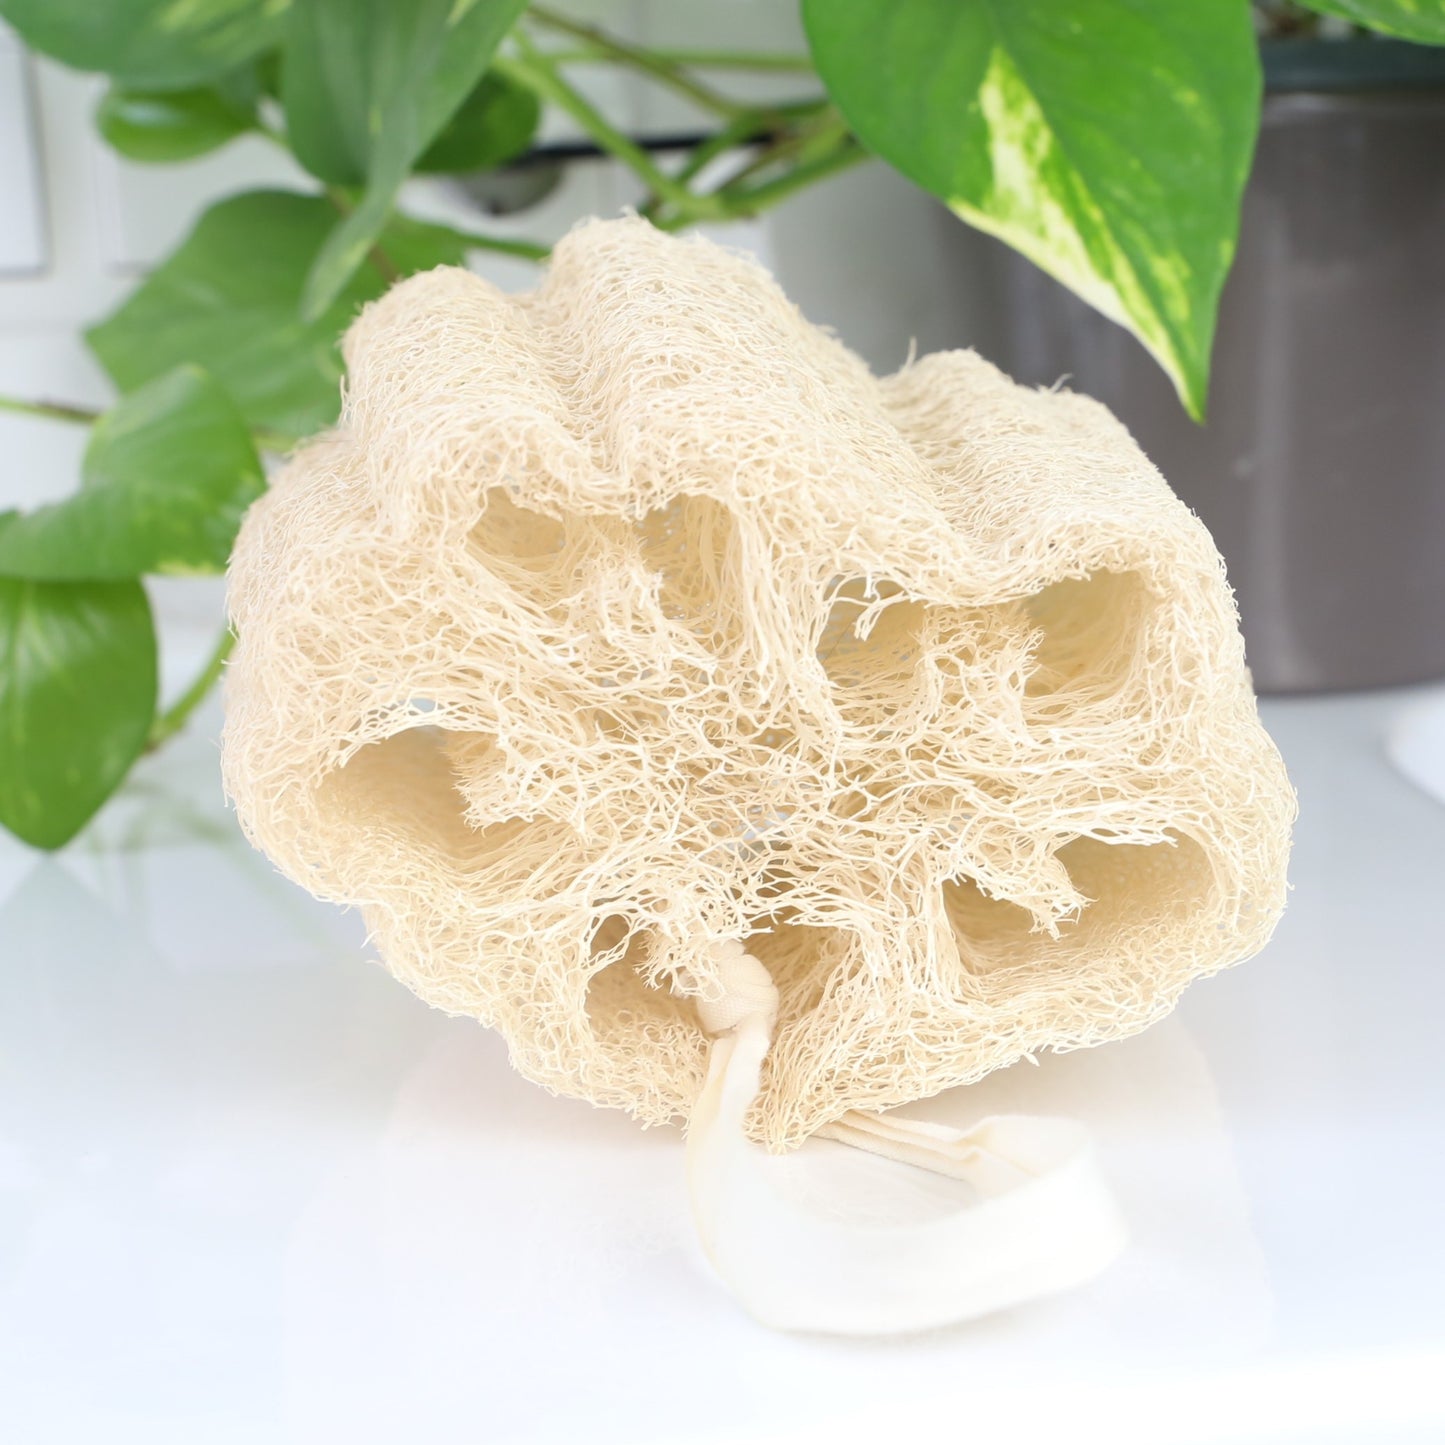 loofah sponge zero waste natural loofah from egypt very soft on the bath